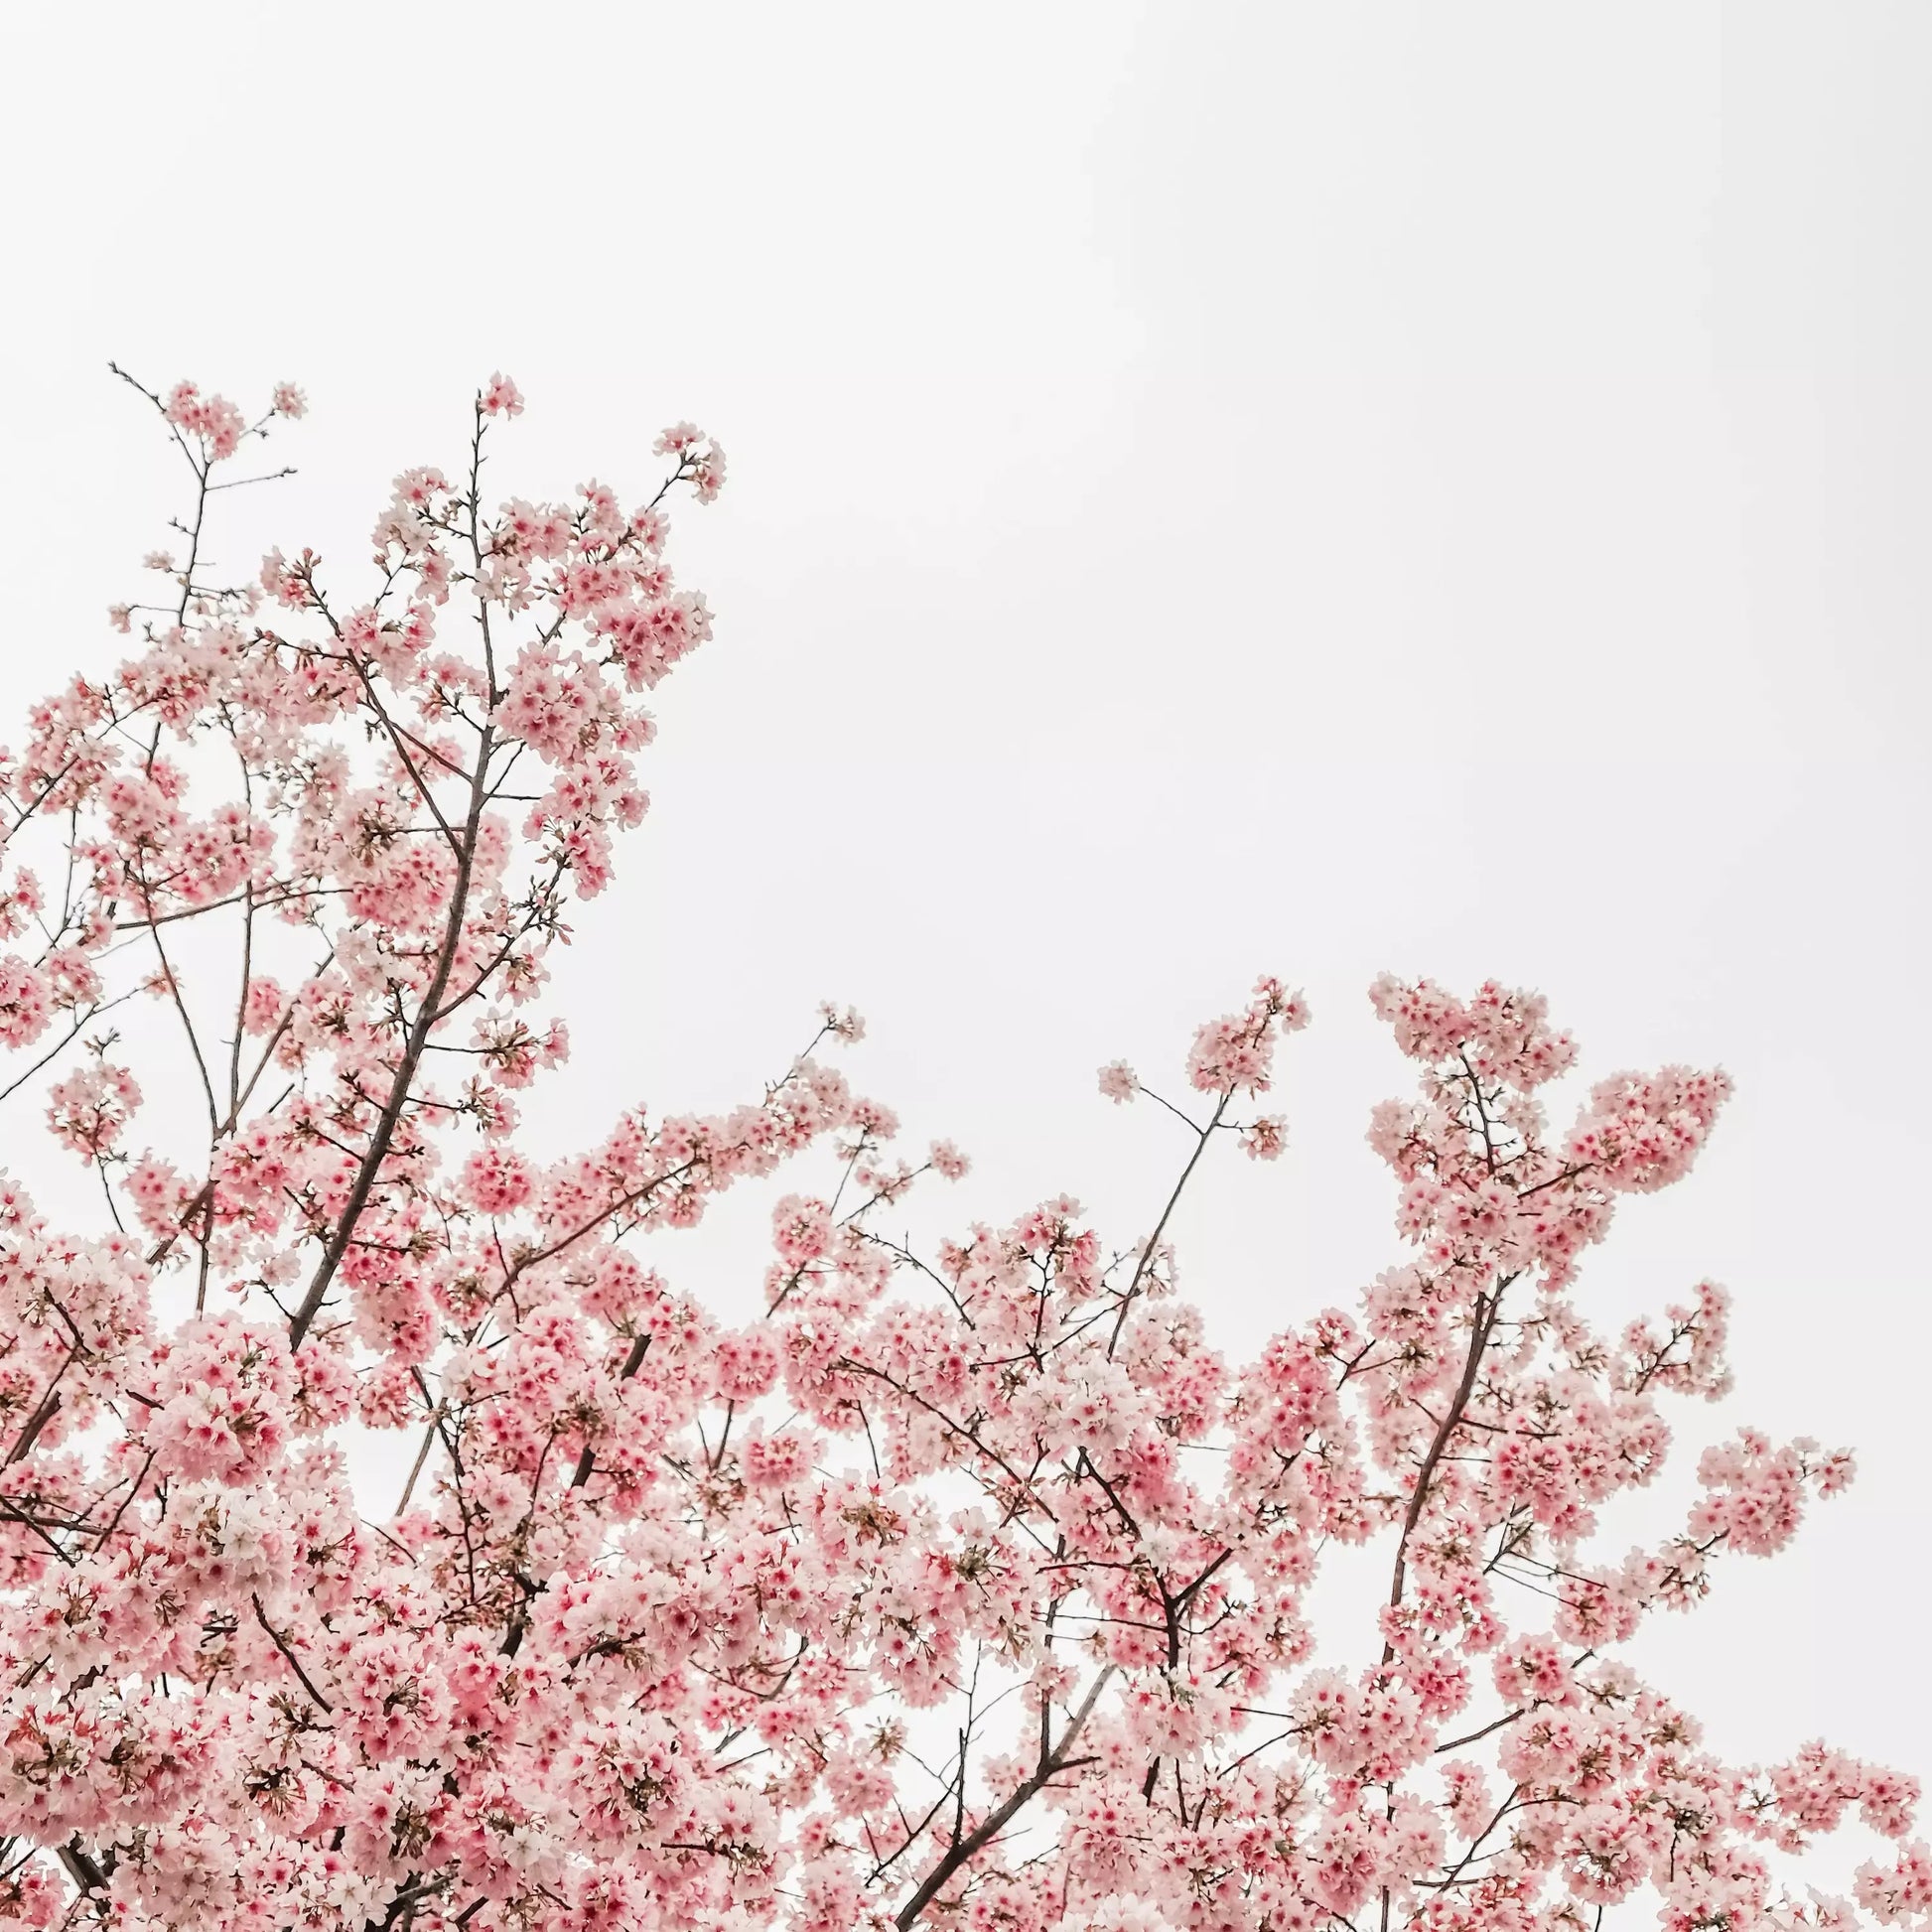 A clear white sky with a full cherry blossom tree in focus.